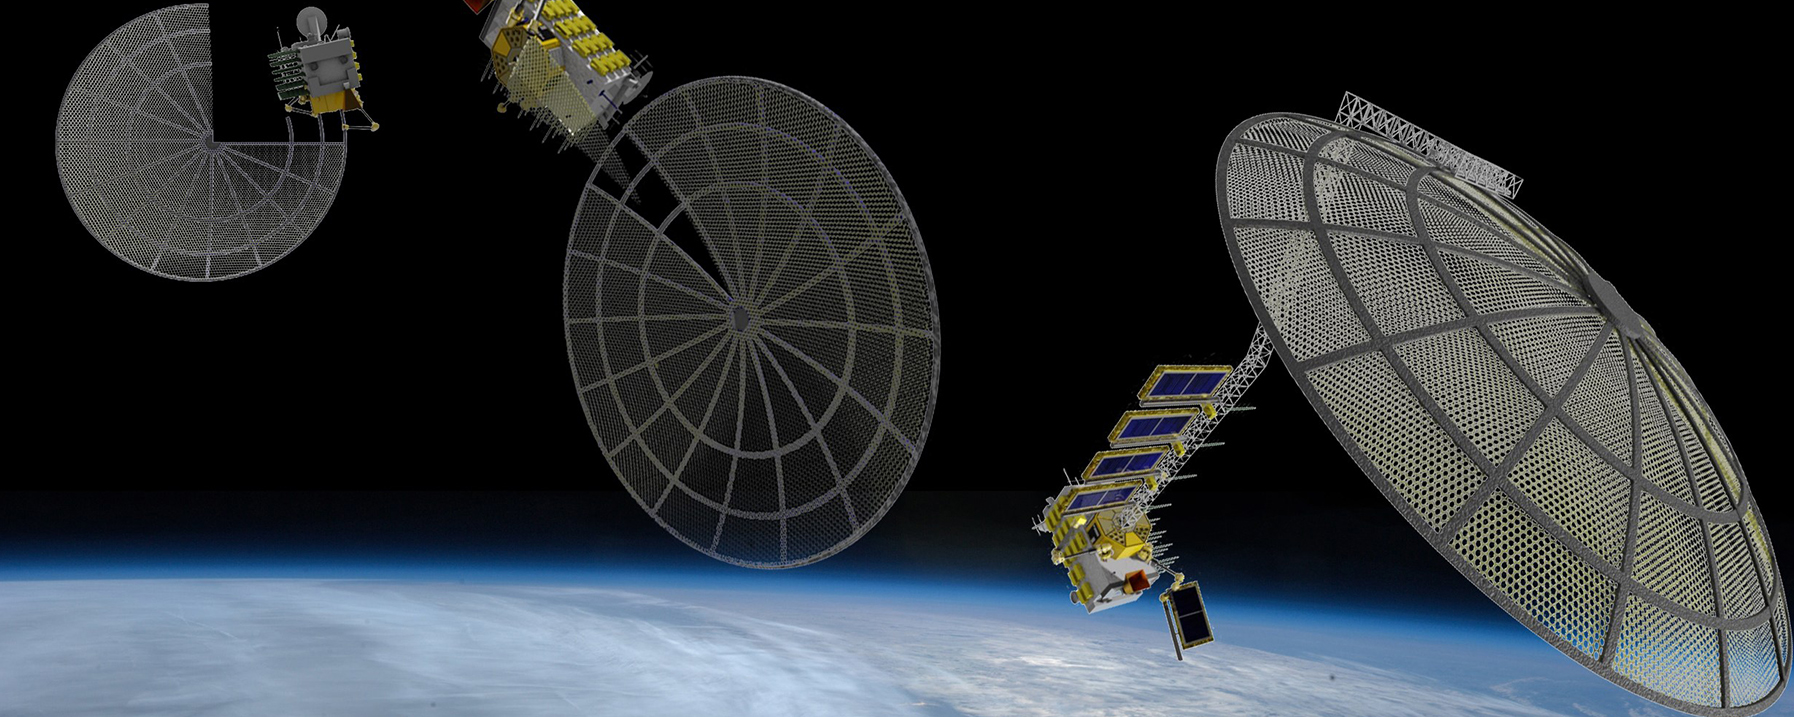 Artist Concept of Archinaut Project in Space